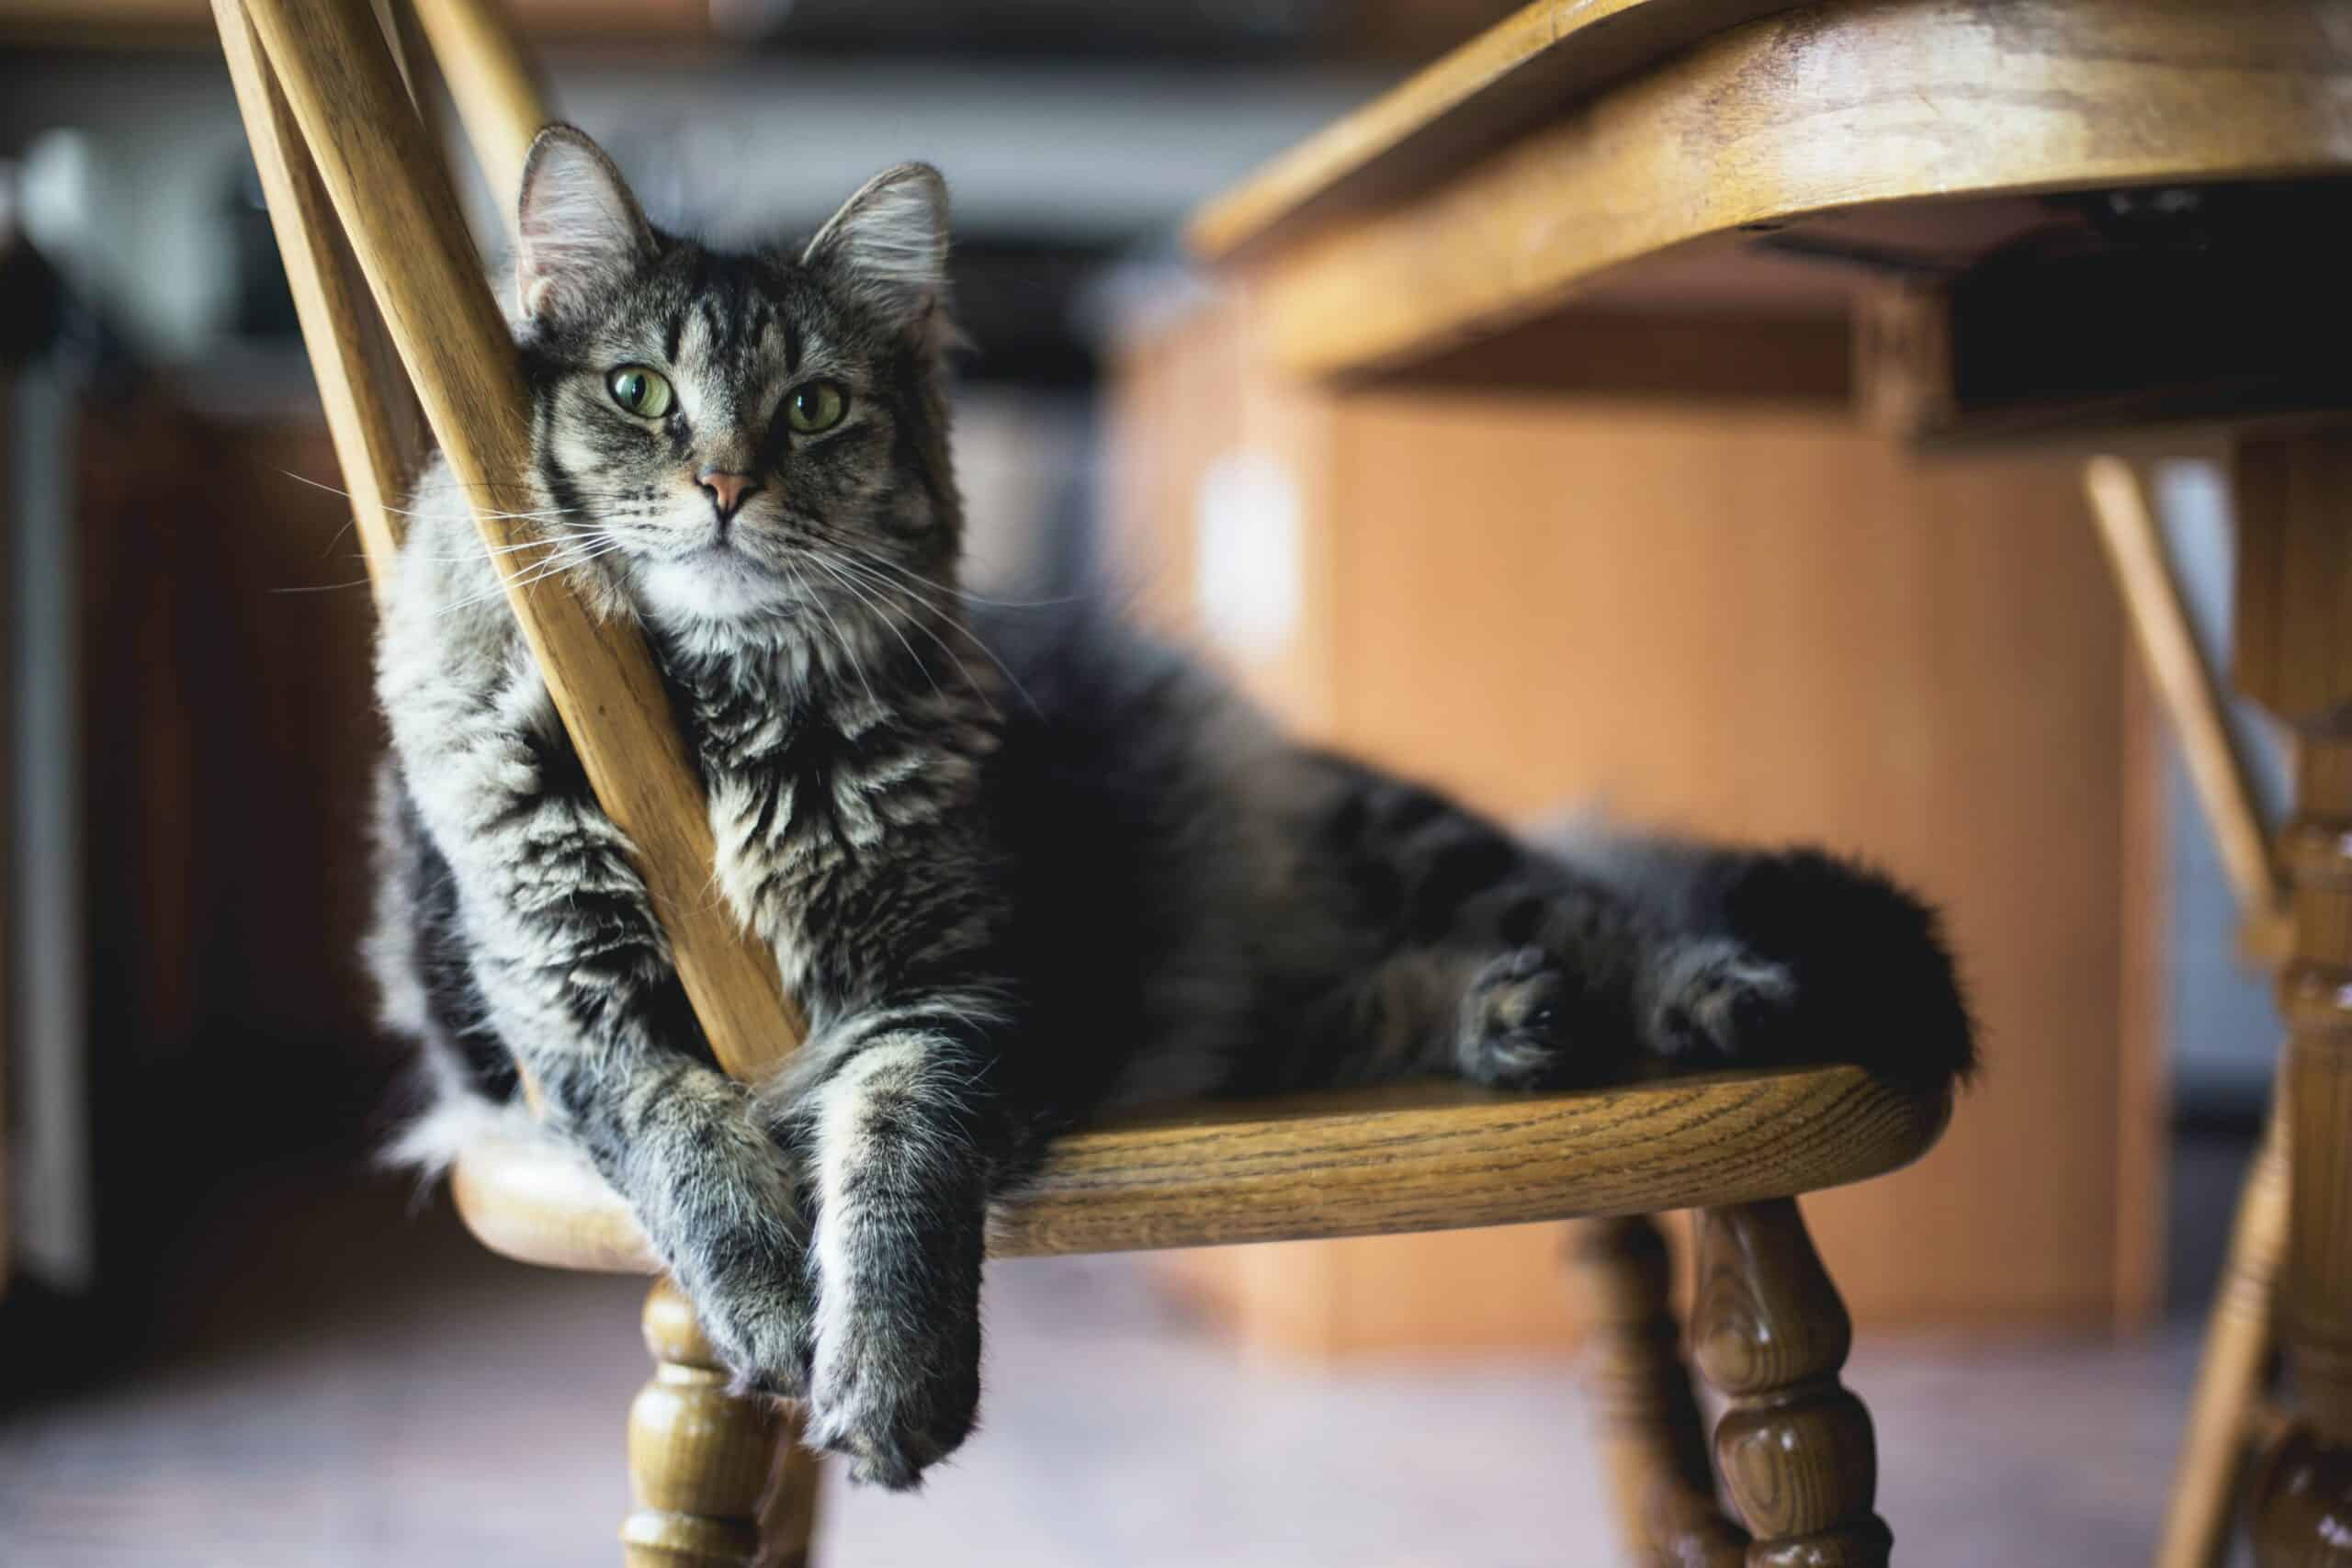 Gray cat lying on a wooden dining chair.